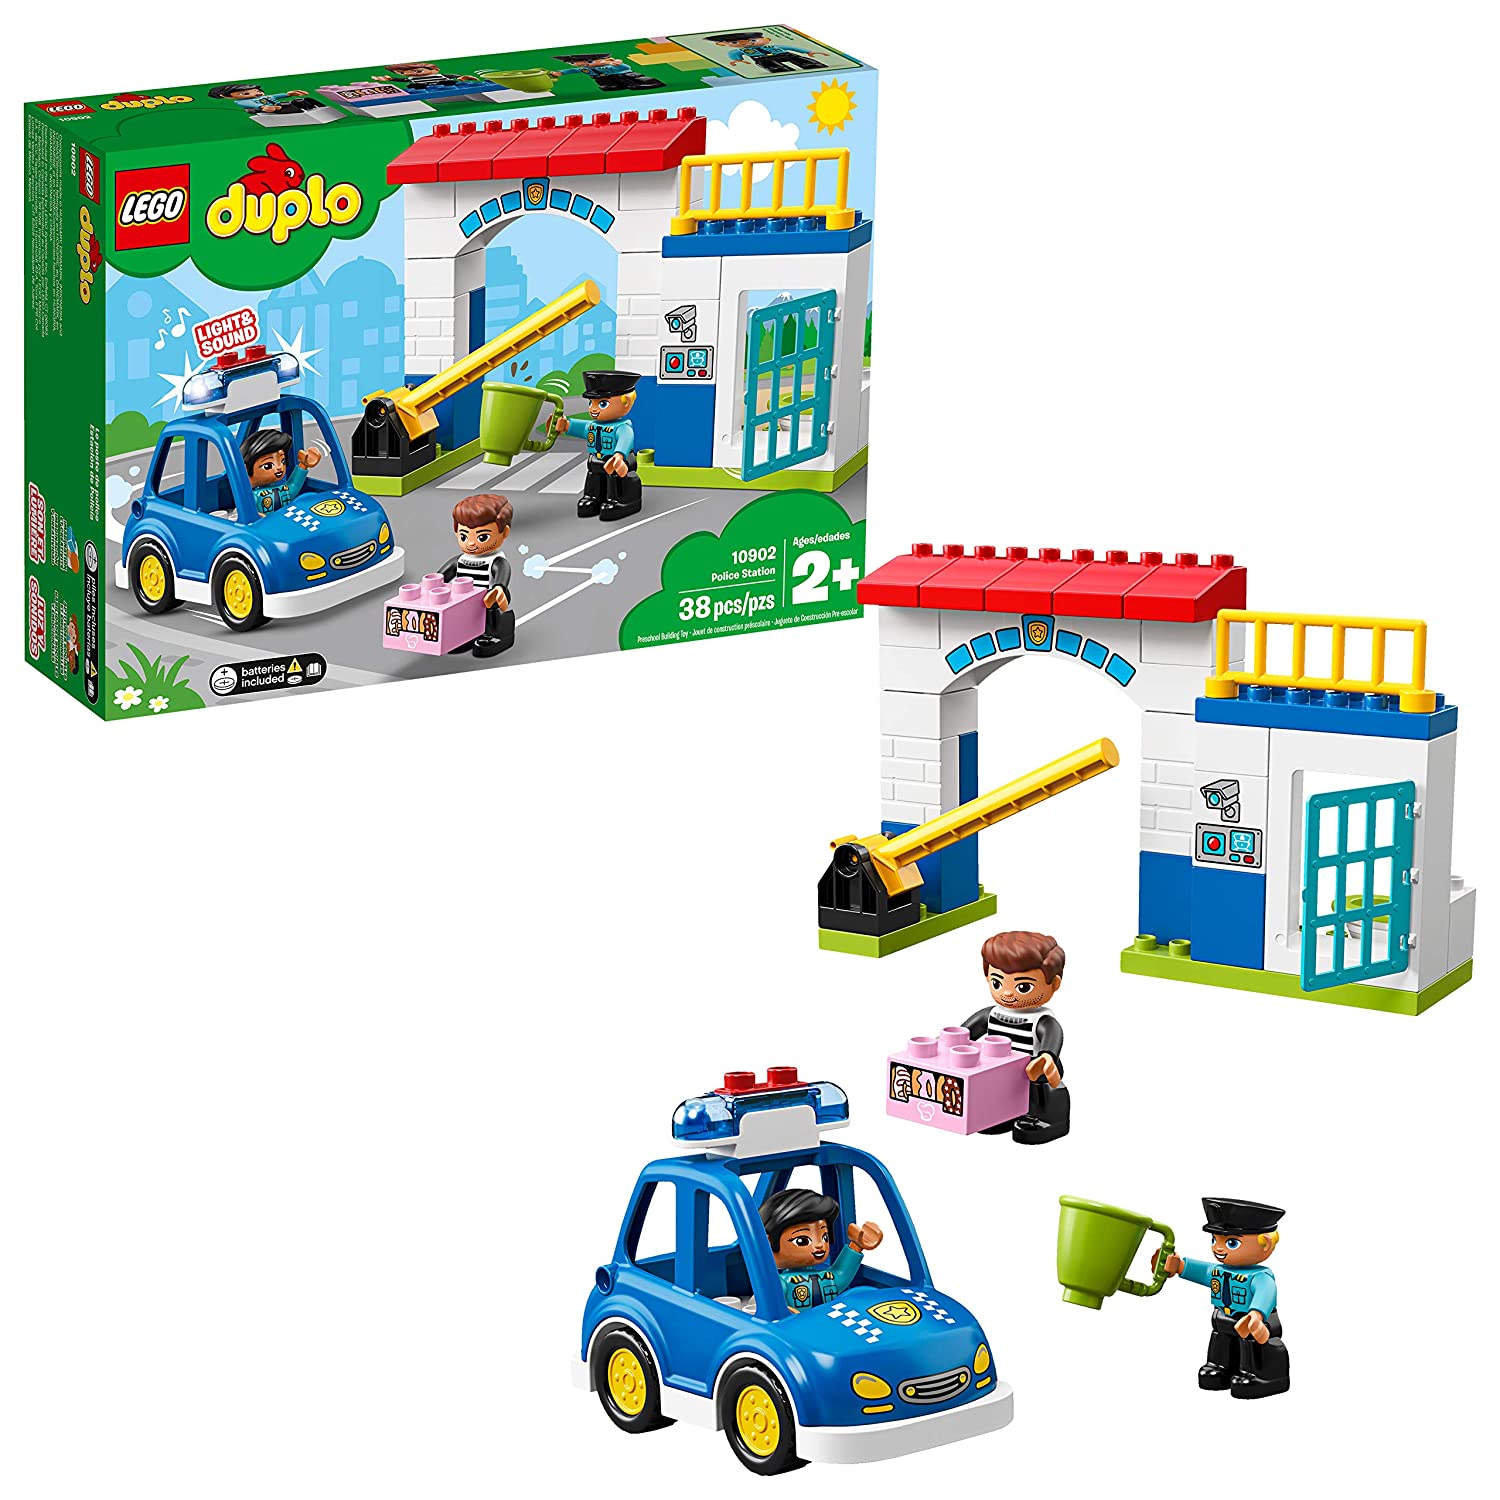 9 Best LEGO Police Station Set 2022 - Buying Guide & Reviews 6